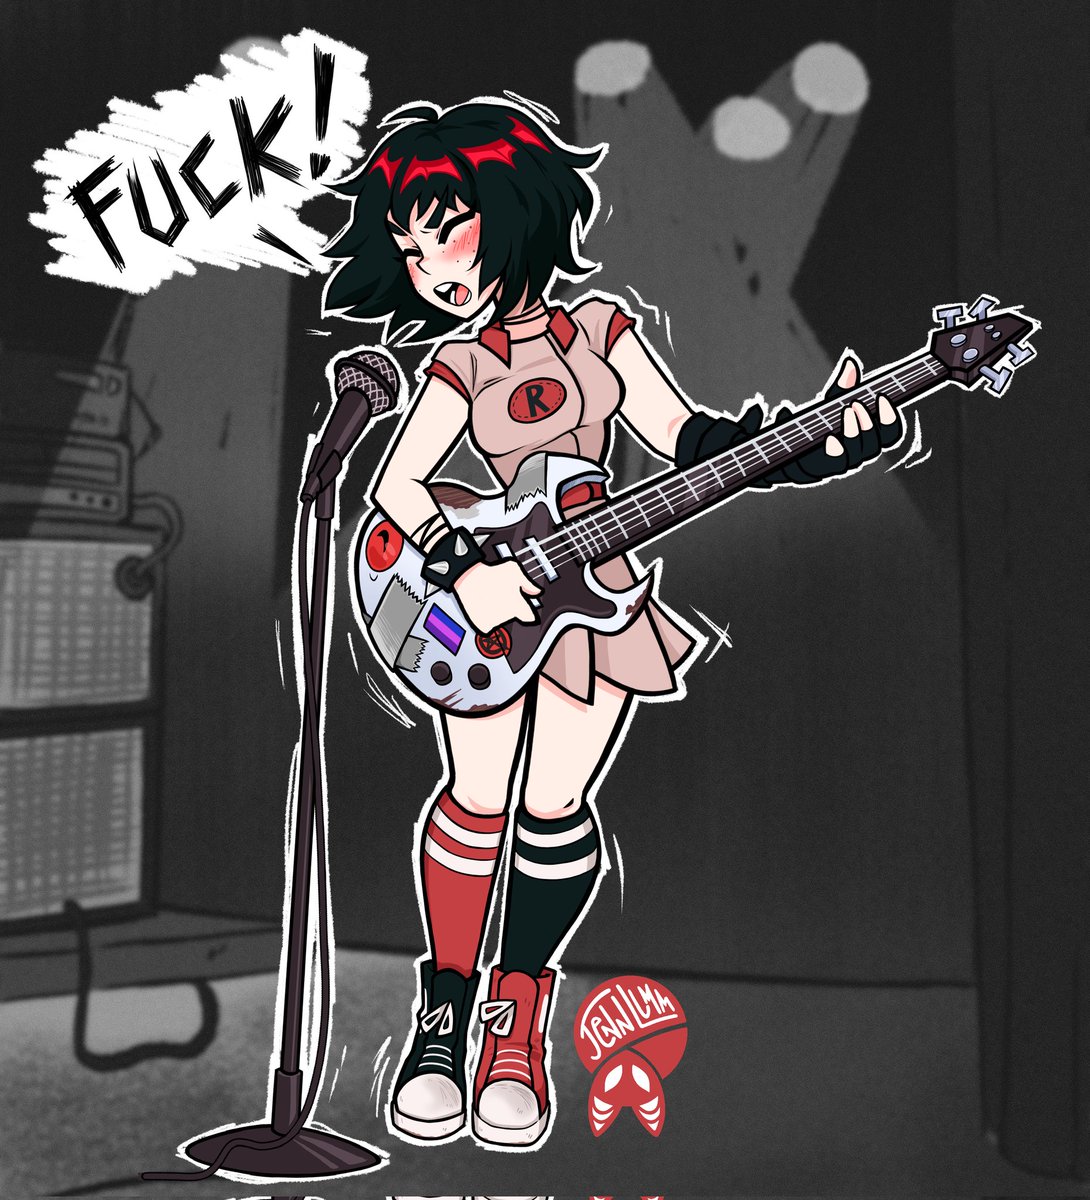 「GIRLS TO THE FRONT!! 」|🎸Mothman's Punk gf🎸のイラスト